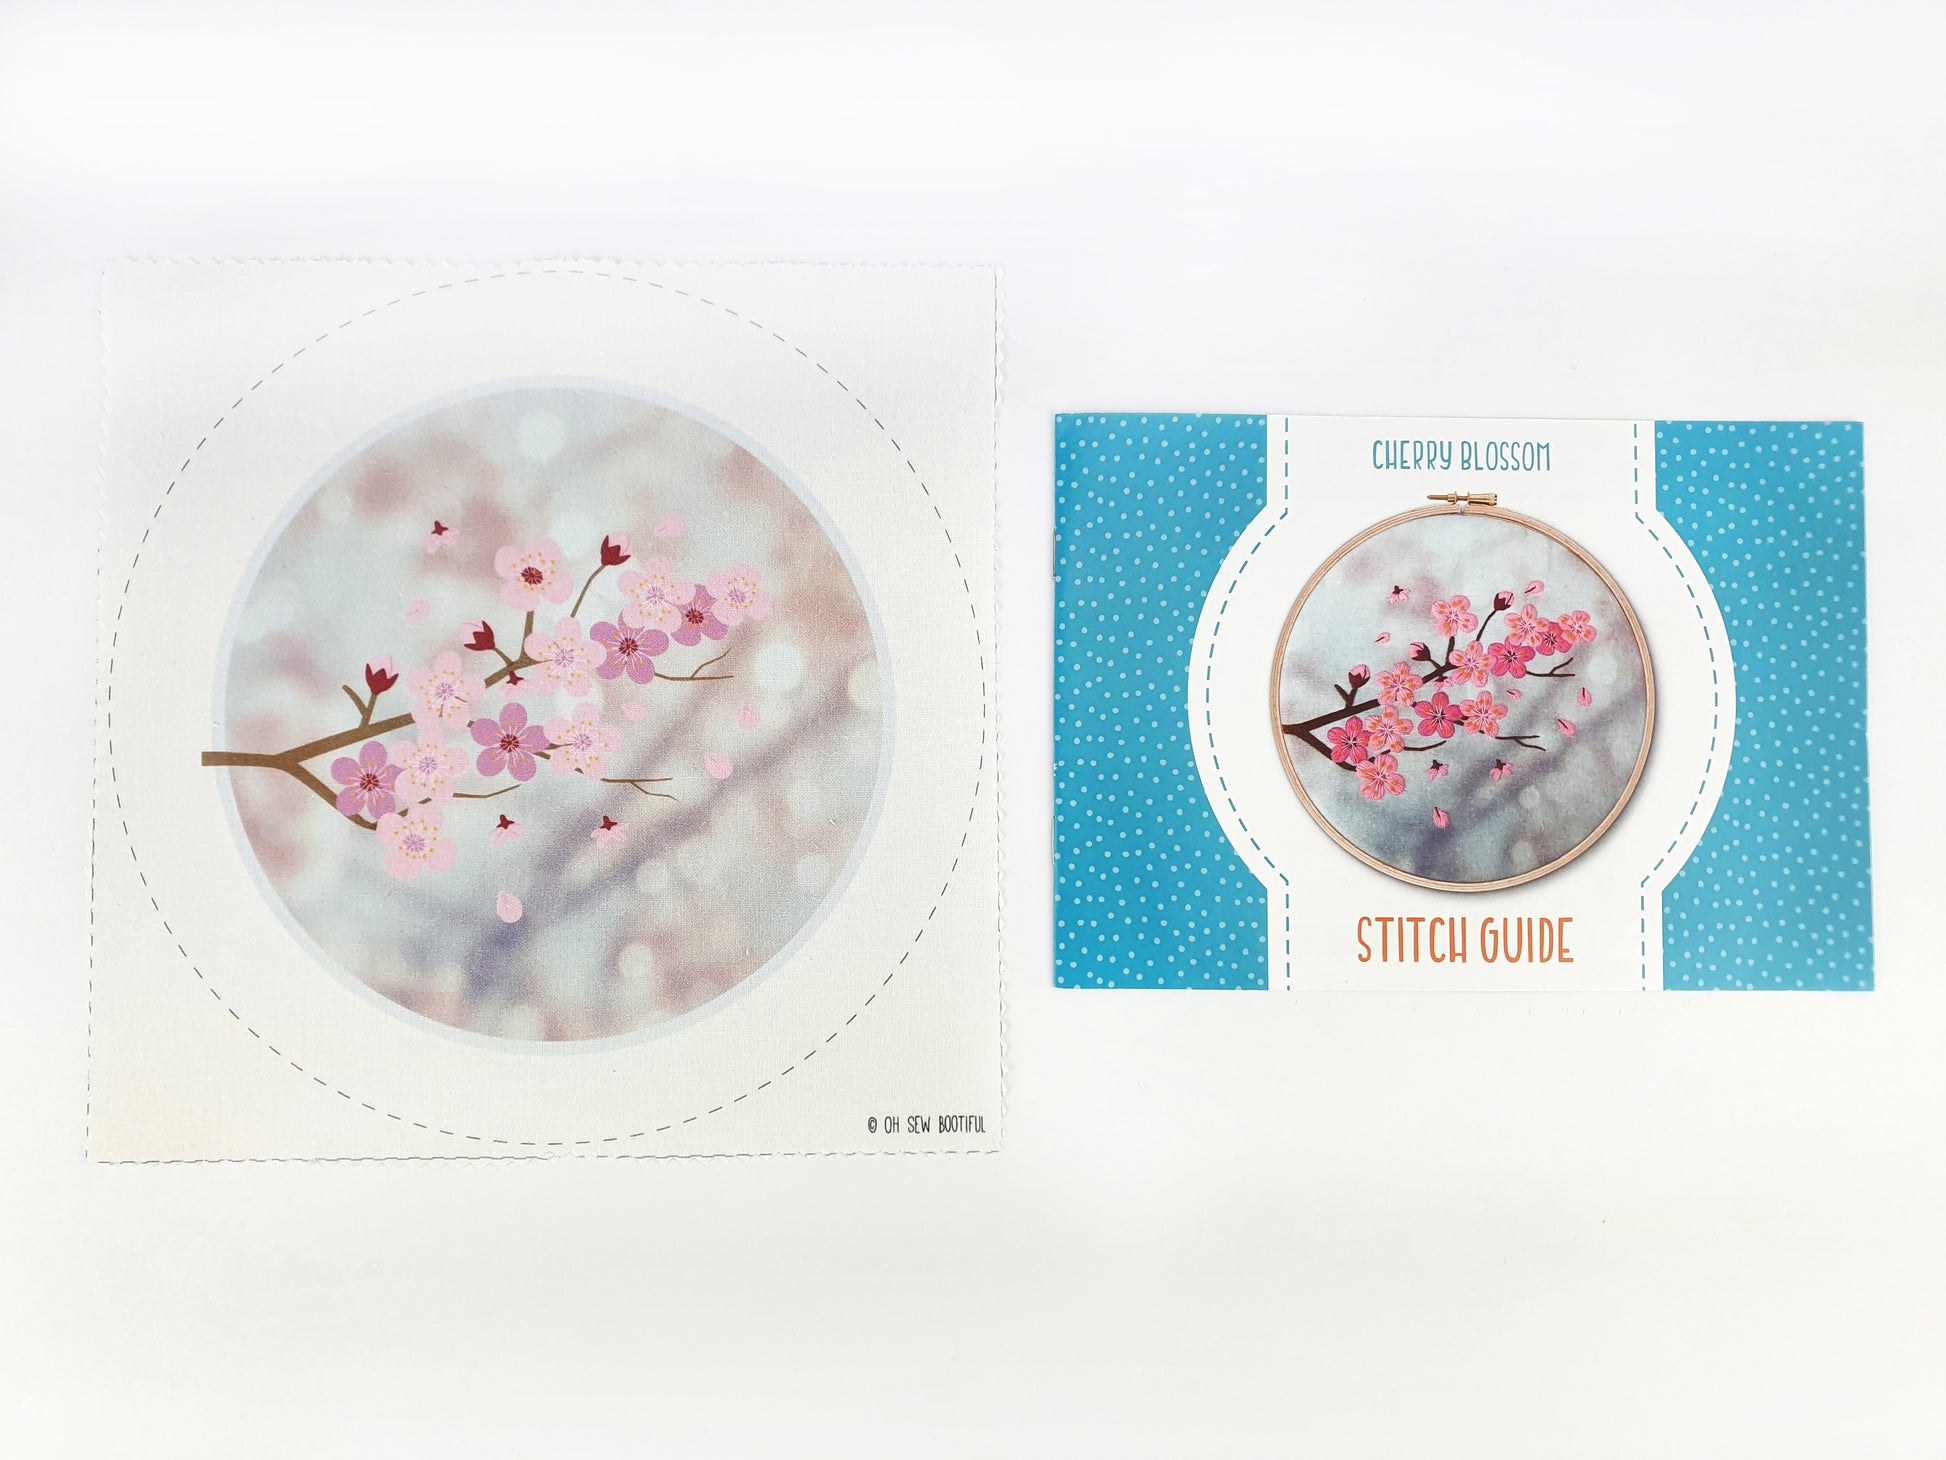 Cherry Blossom Embroidery Fabric Pattern Pack - Fabric Packs - ohsewbootiful